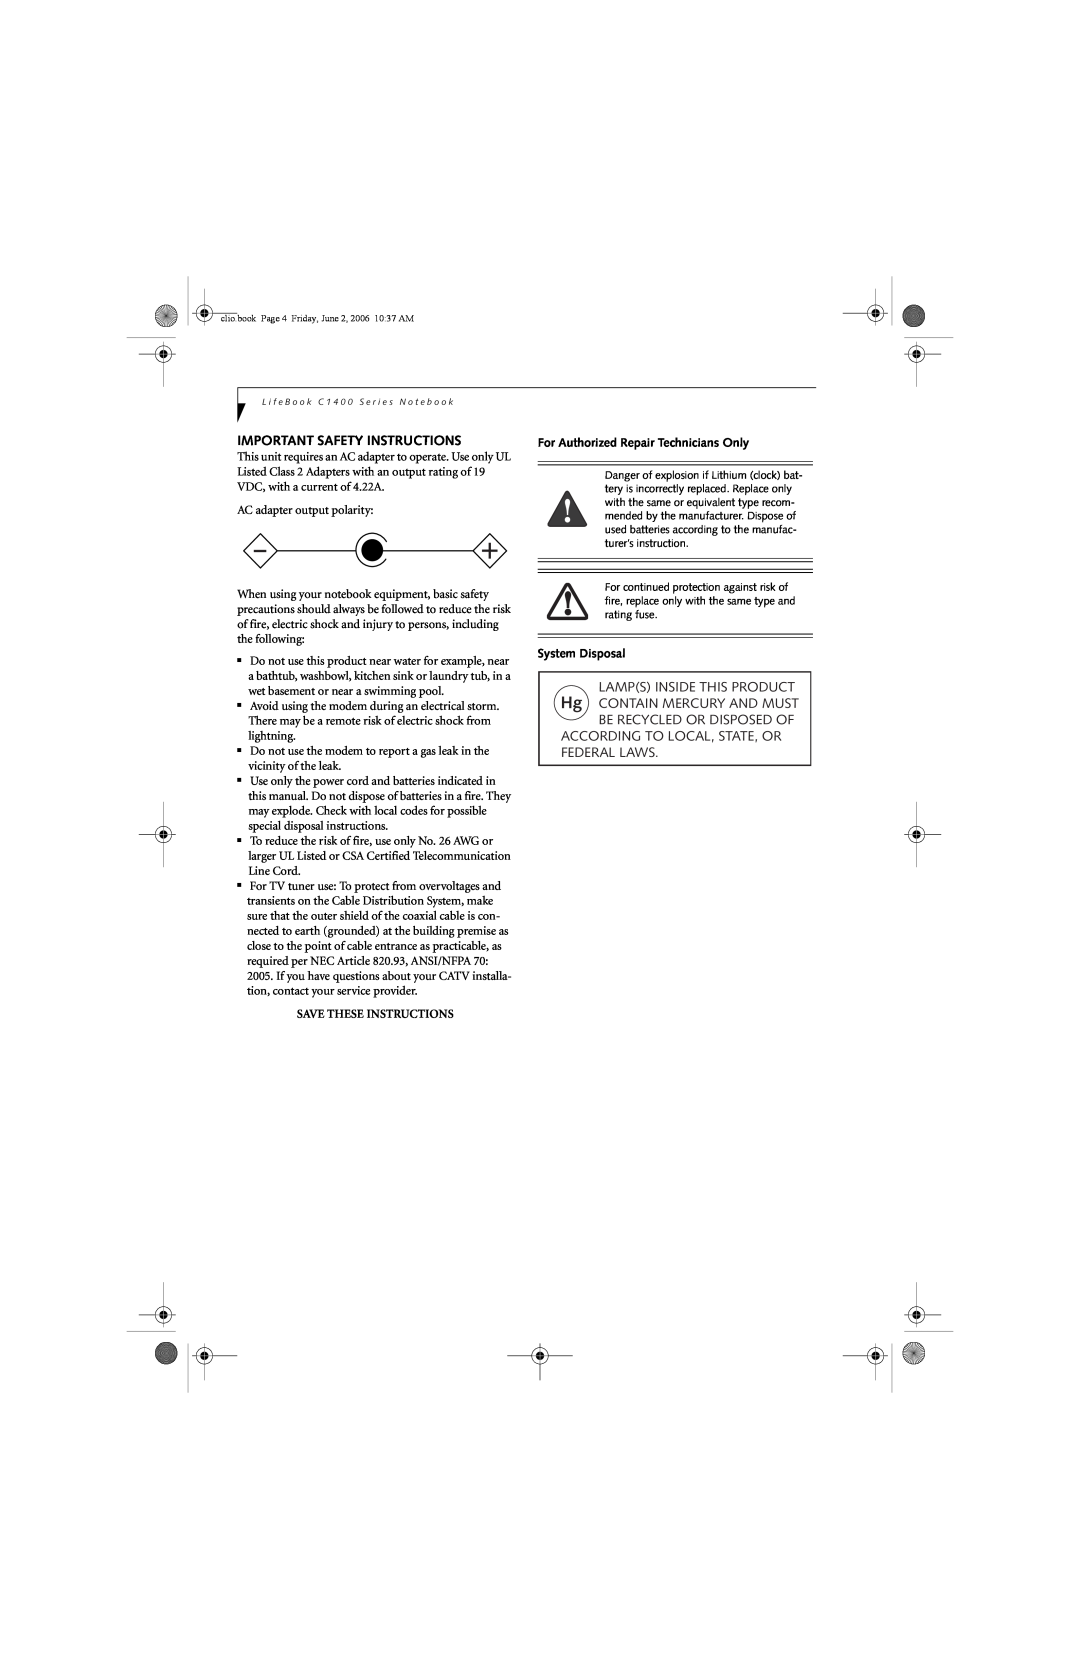 Fujitsu C1410 manual Important Safety Instructions, According To Local, State, Or Federal Laws, Save These Instructions 